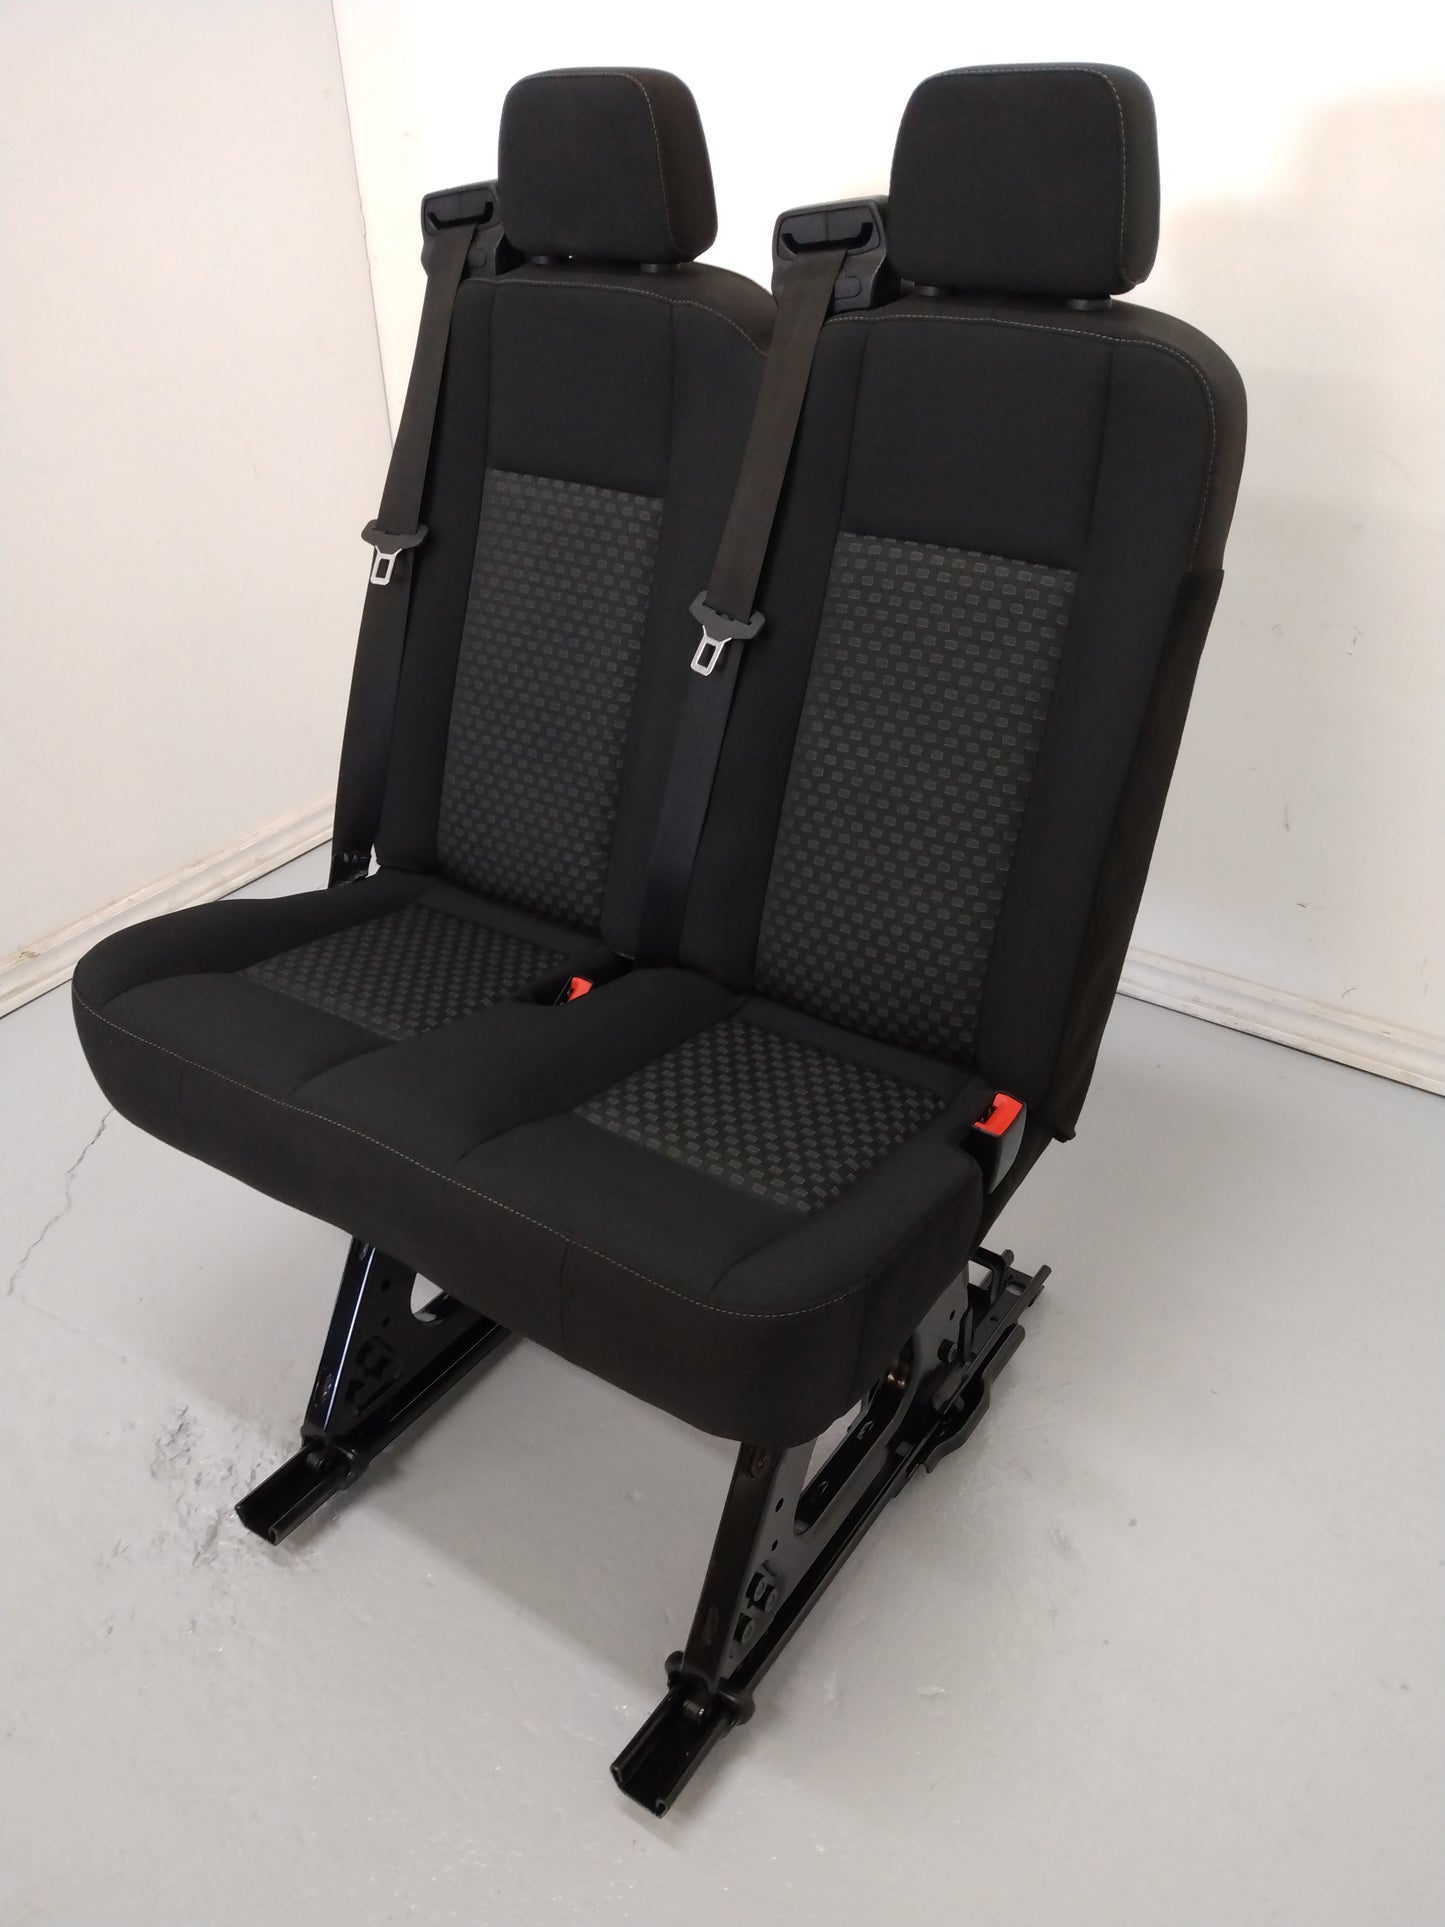 Ford Transit van 2020 black cloth right side 31 inch wide 2 position bench seat with mounts.  Removable quick release universal fit 